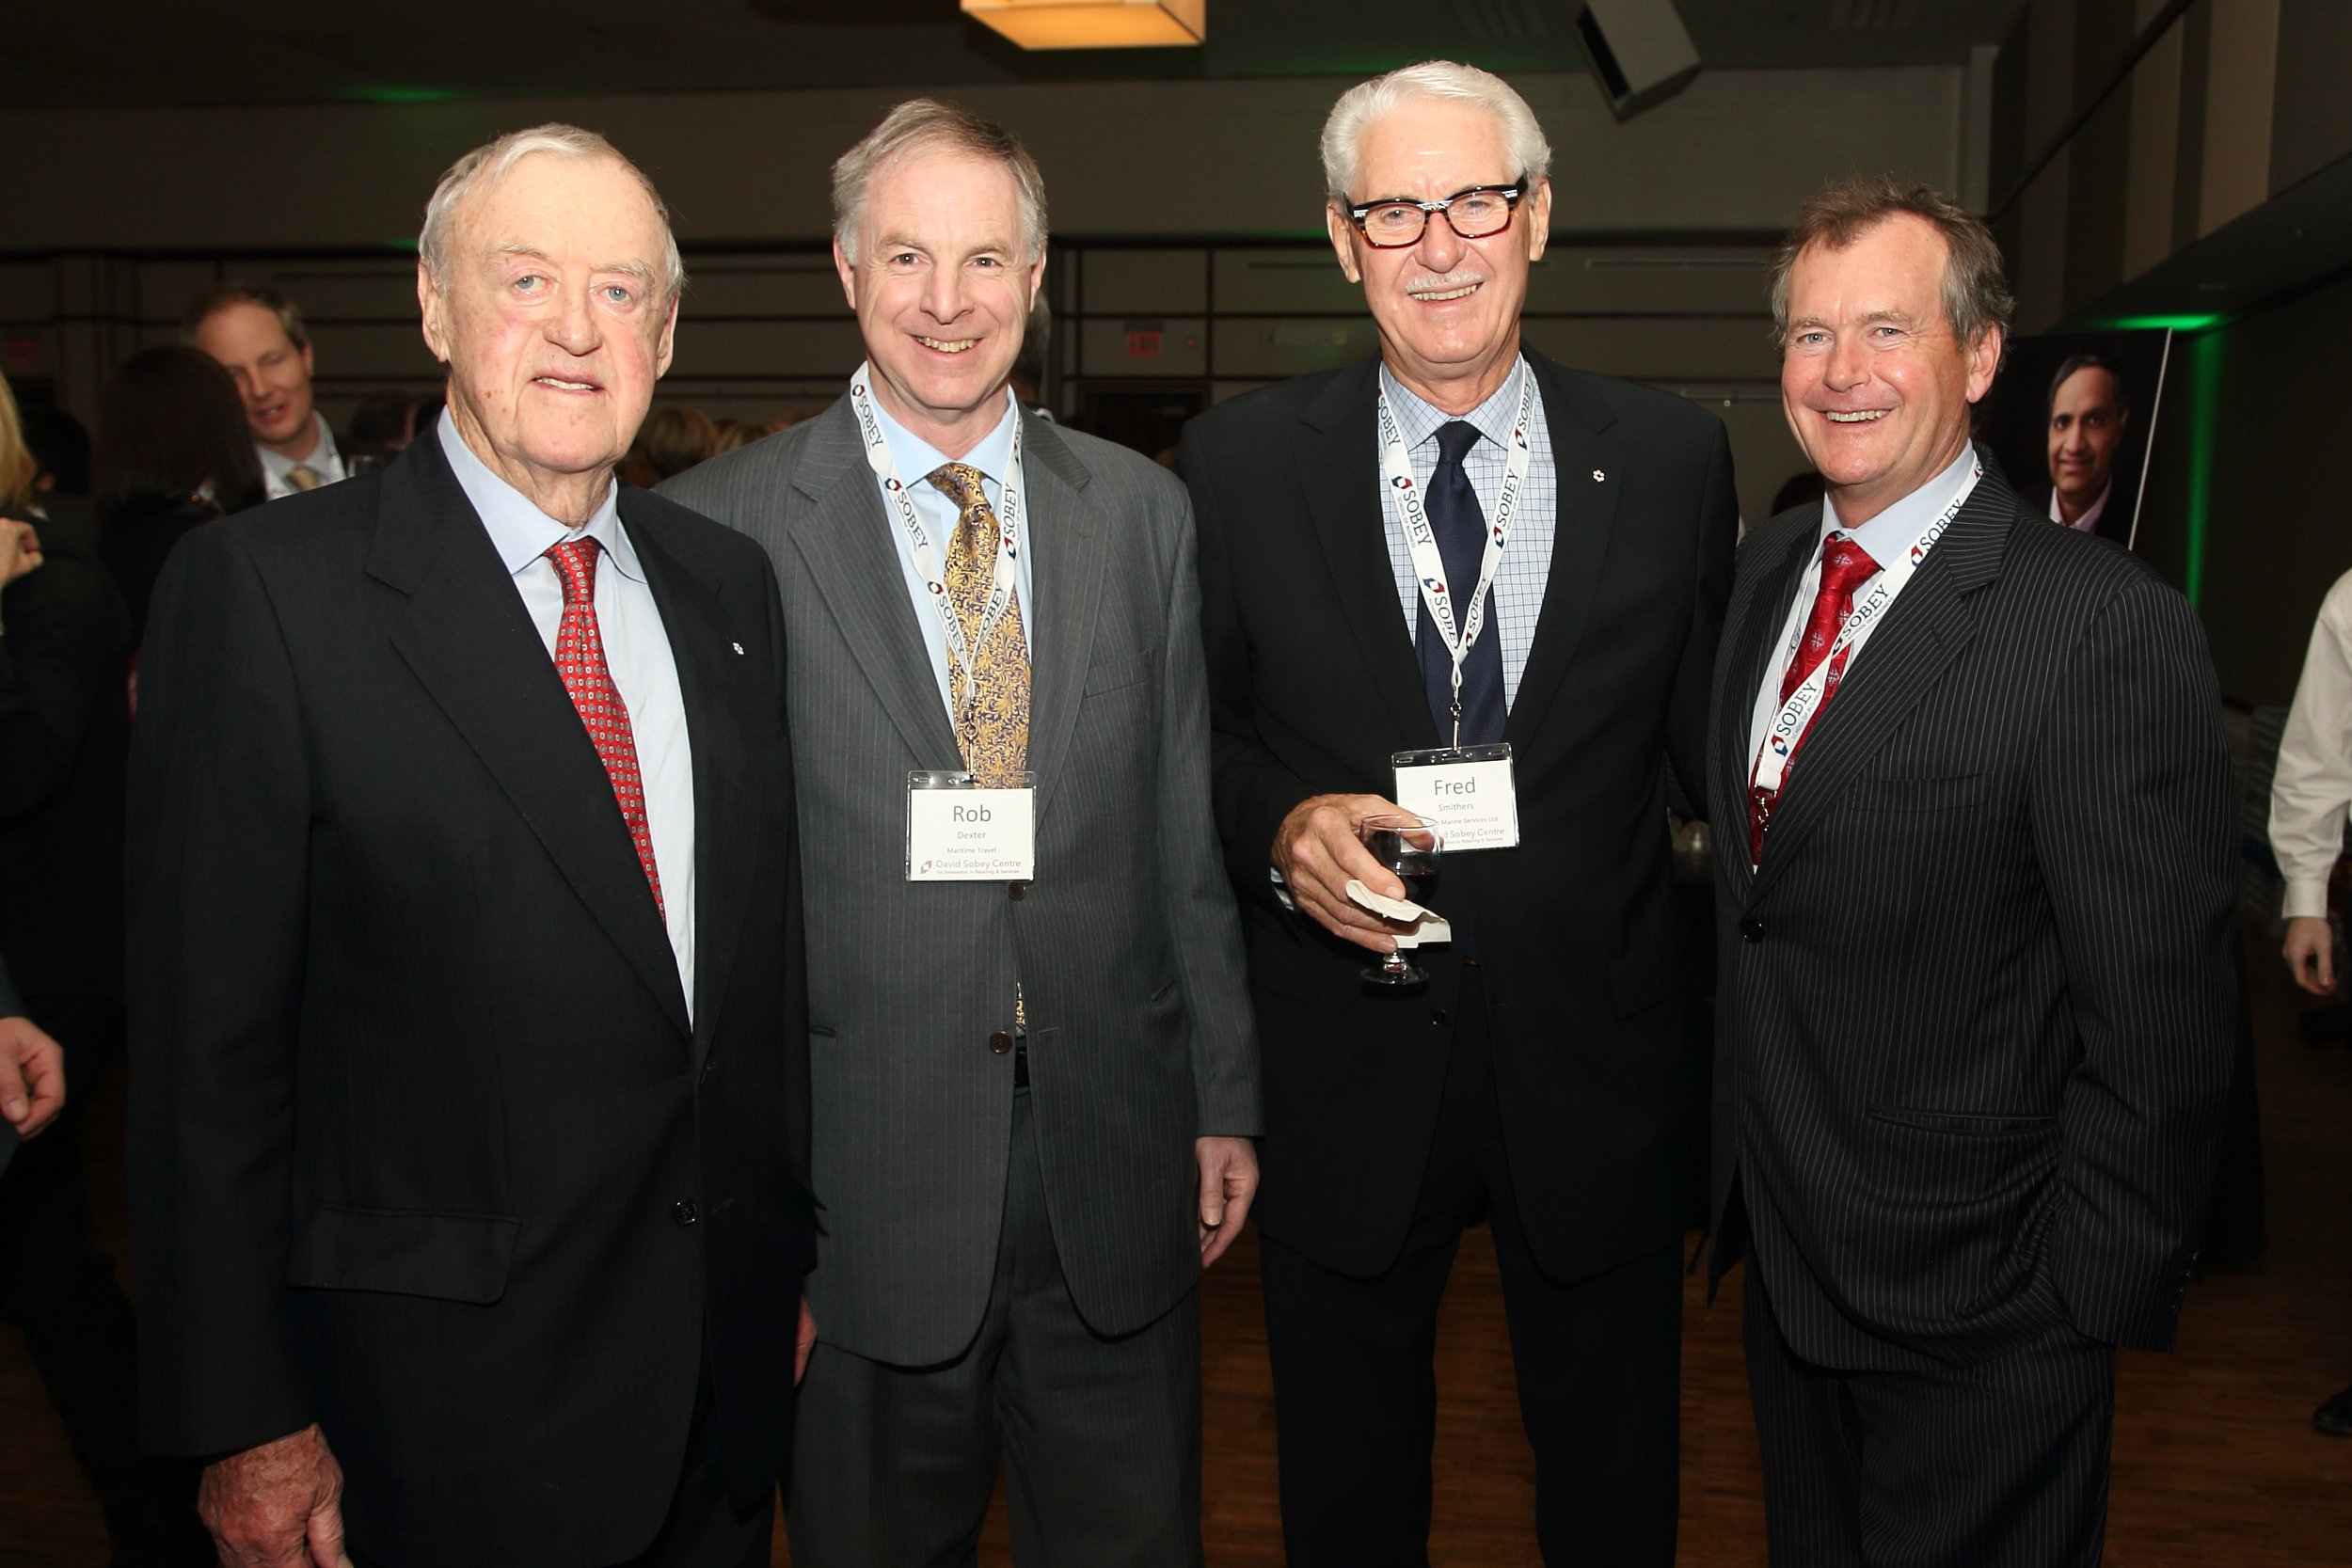  L-R: David Sobey, Rob Dexter, Fred Smithers, Paul Sobey 